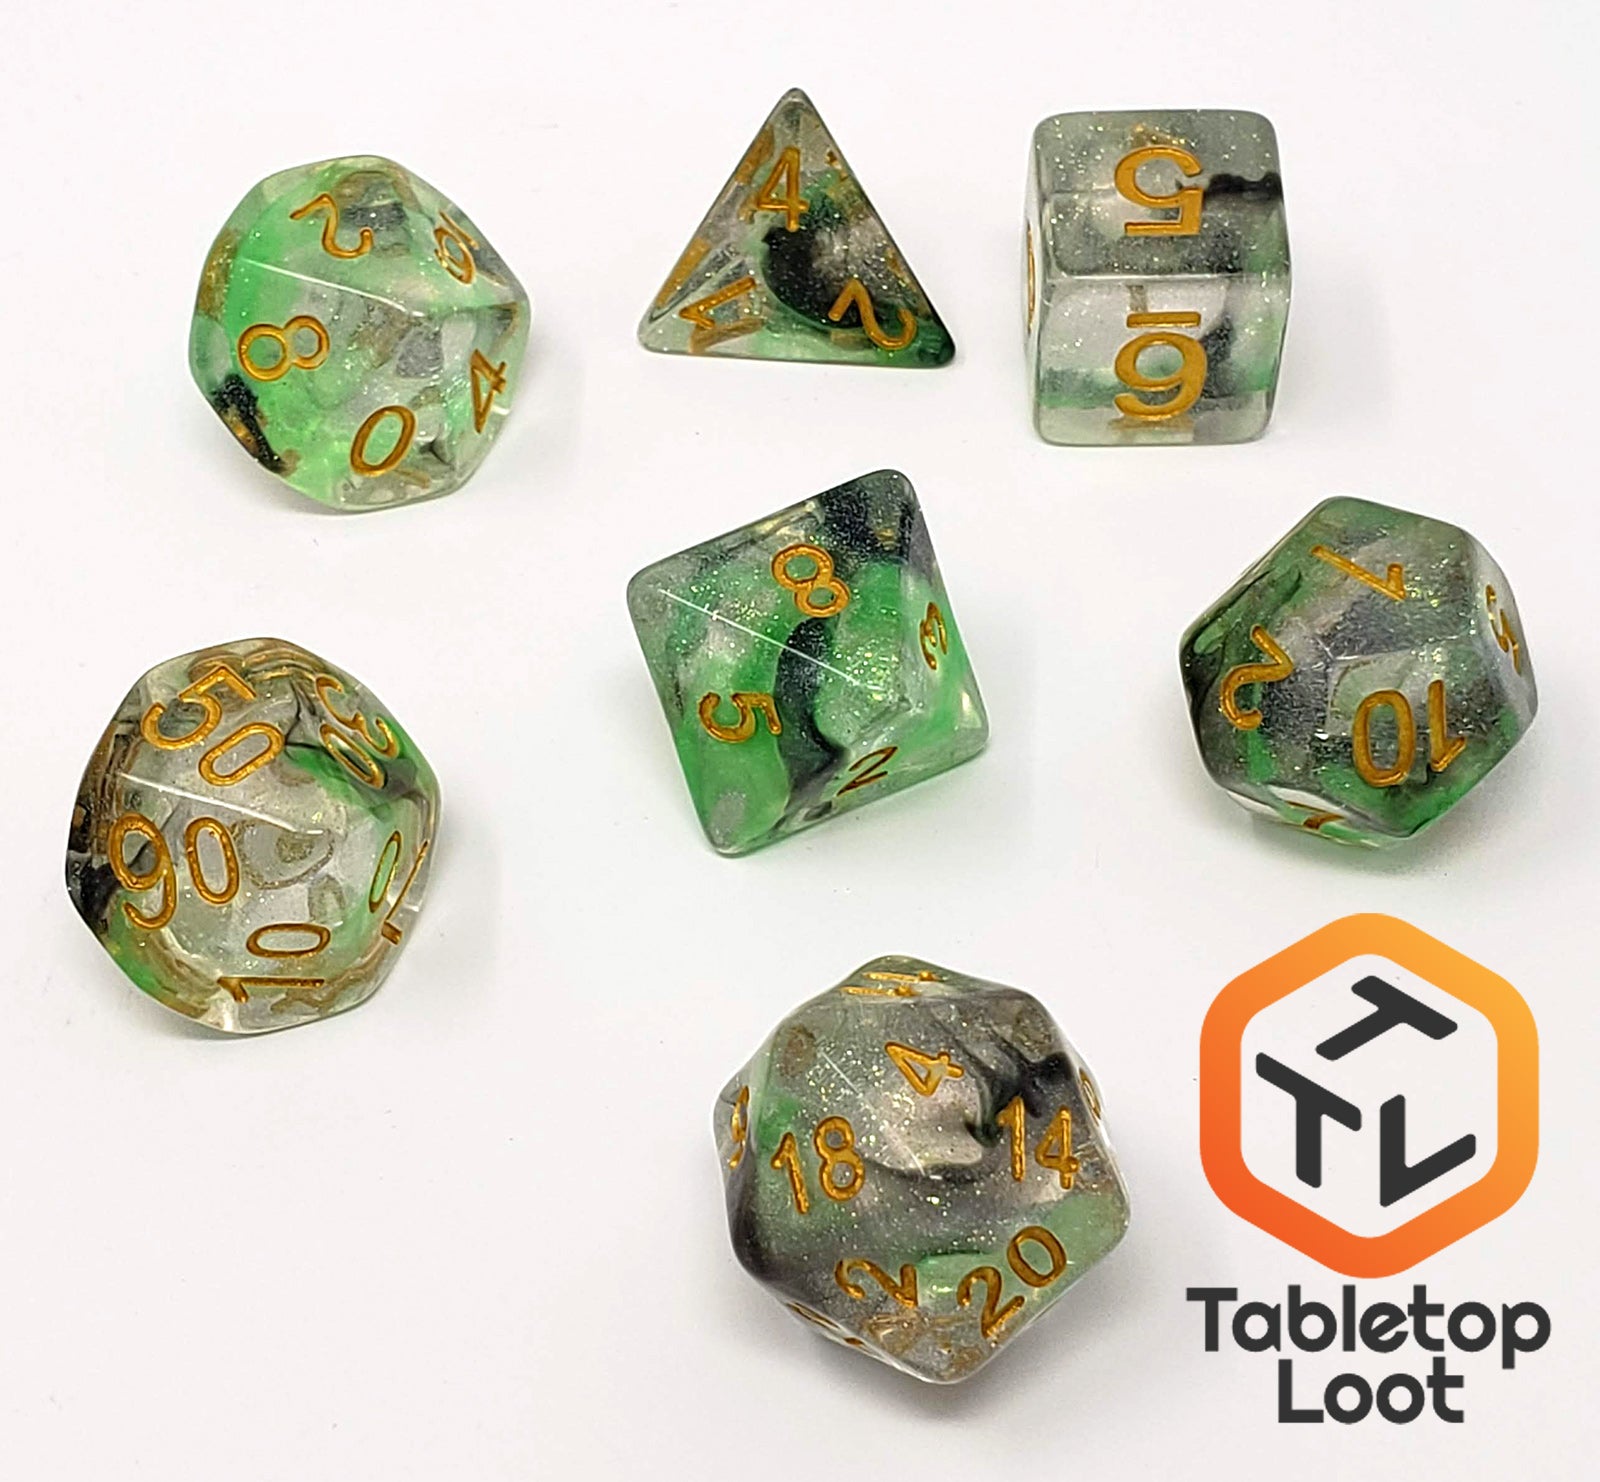 The Luminous Venom 7 piece dice set from Tabletop Loot with green and black swirls in a clear glittery resin with gold numbering.